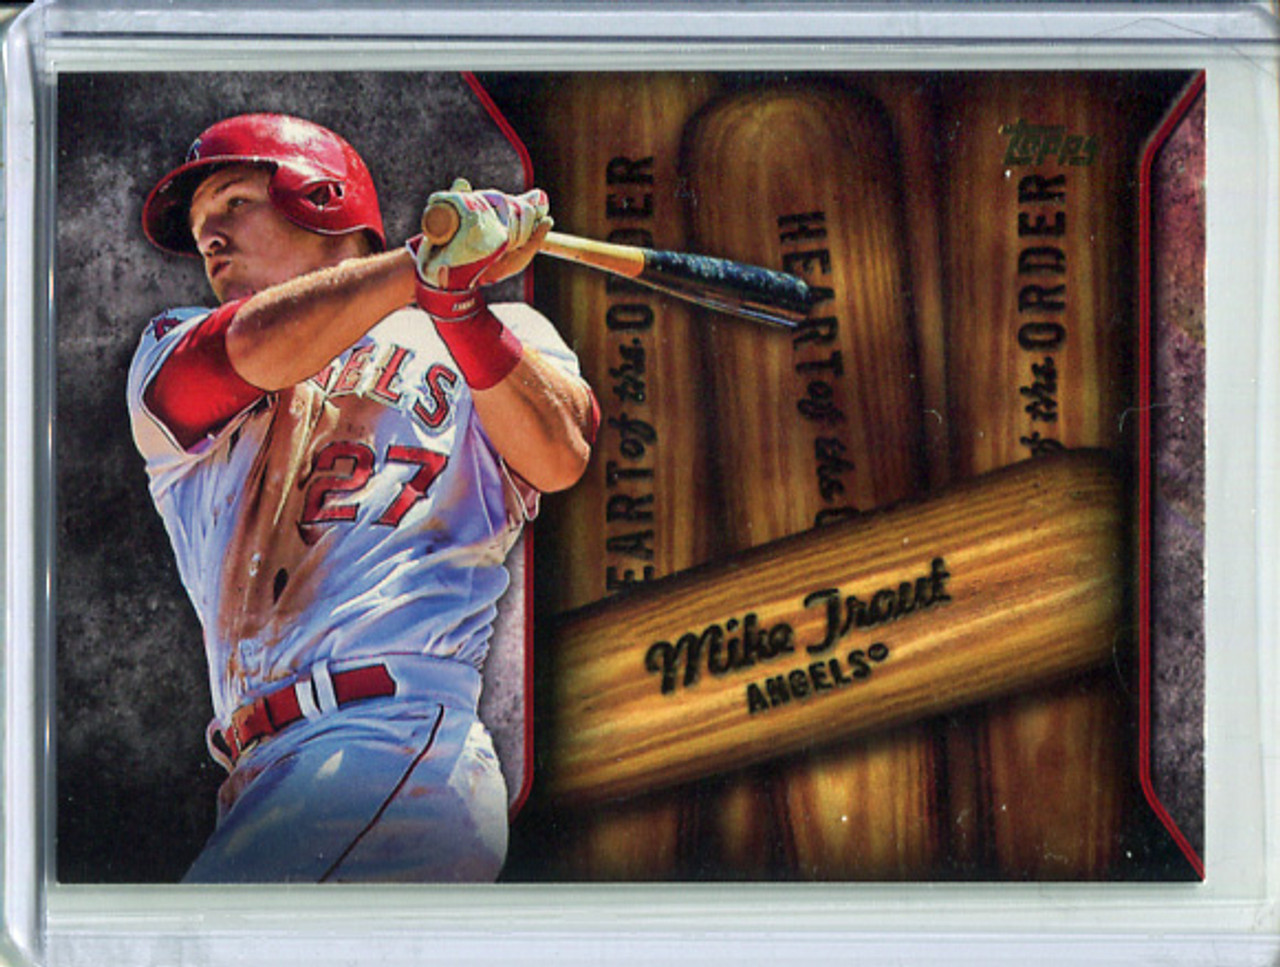 Mike Trout 2015 Topps, Heart of the Order #HOR-7